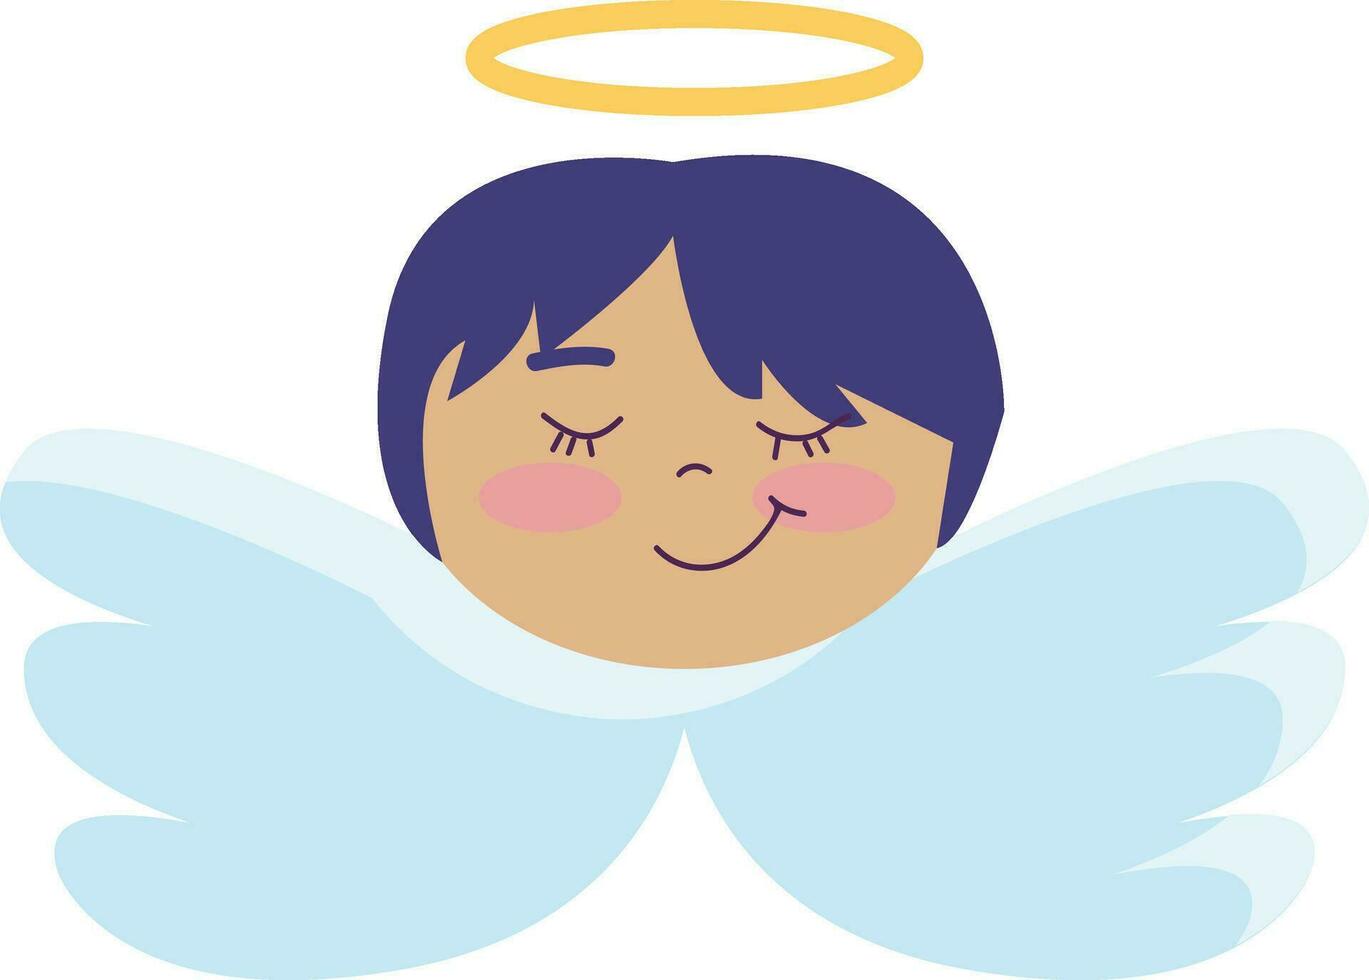 Angel with short blue hair  illustration  color  vector on white background